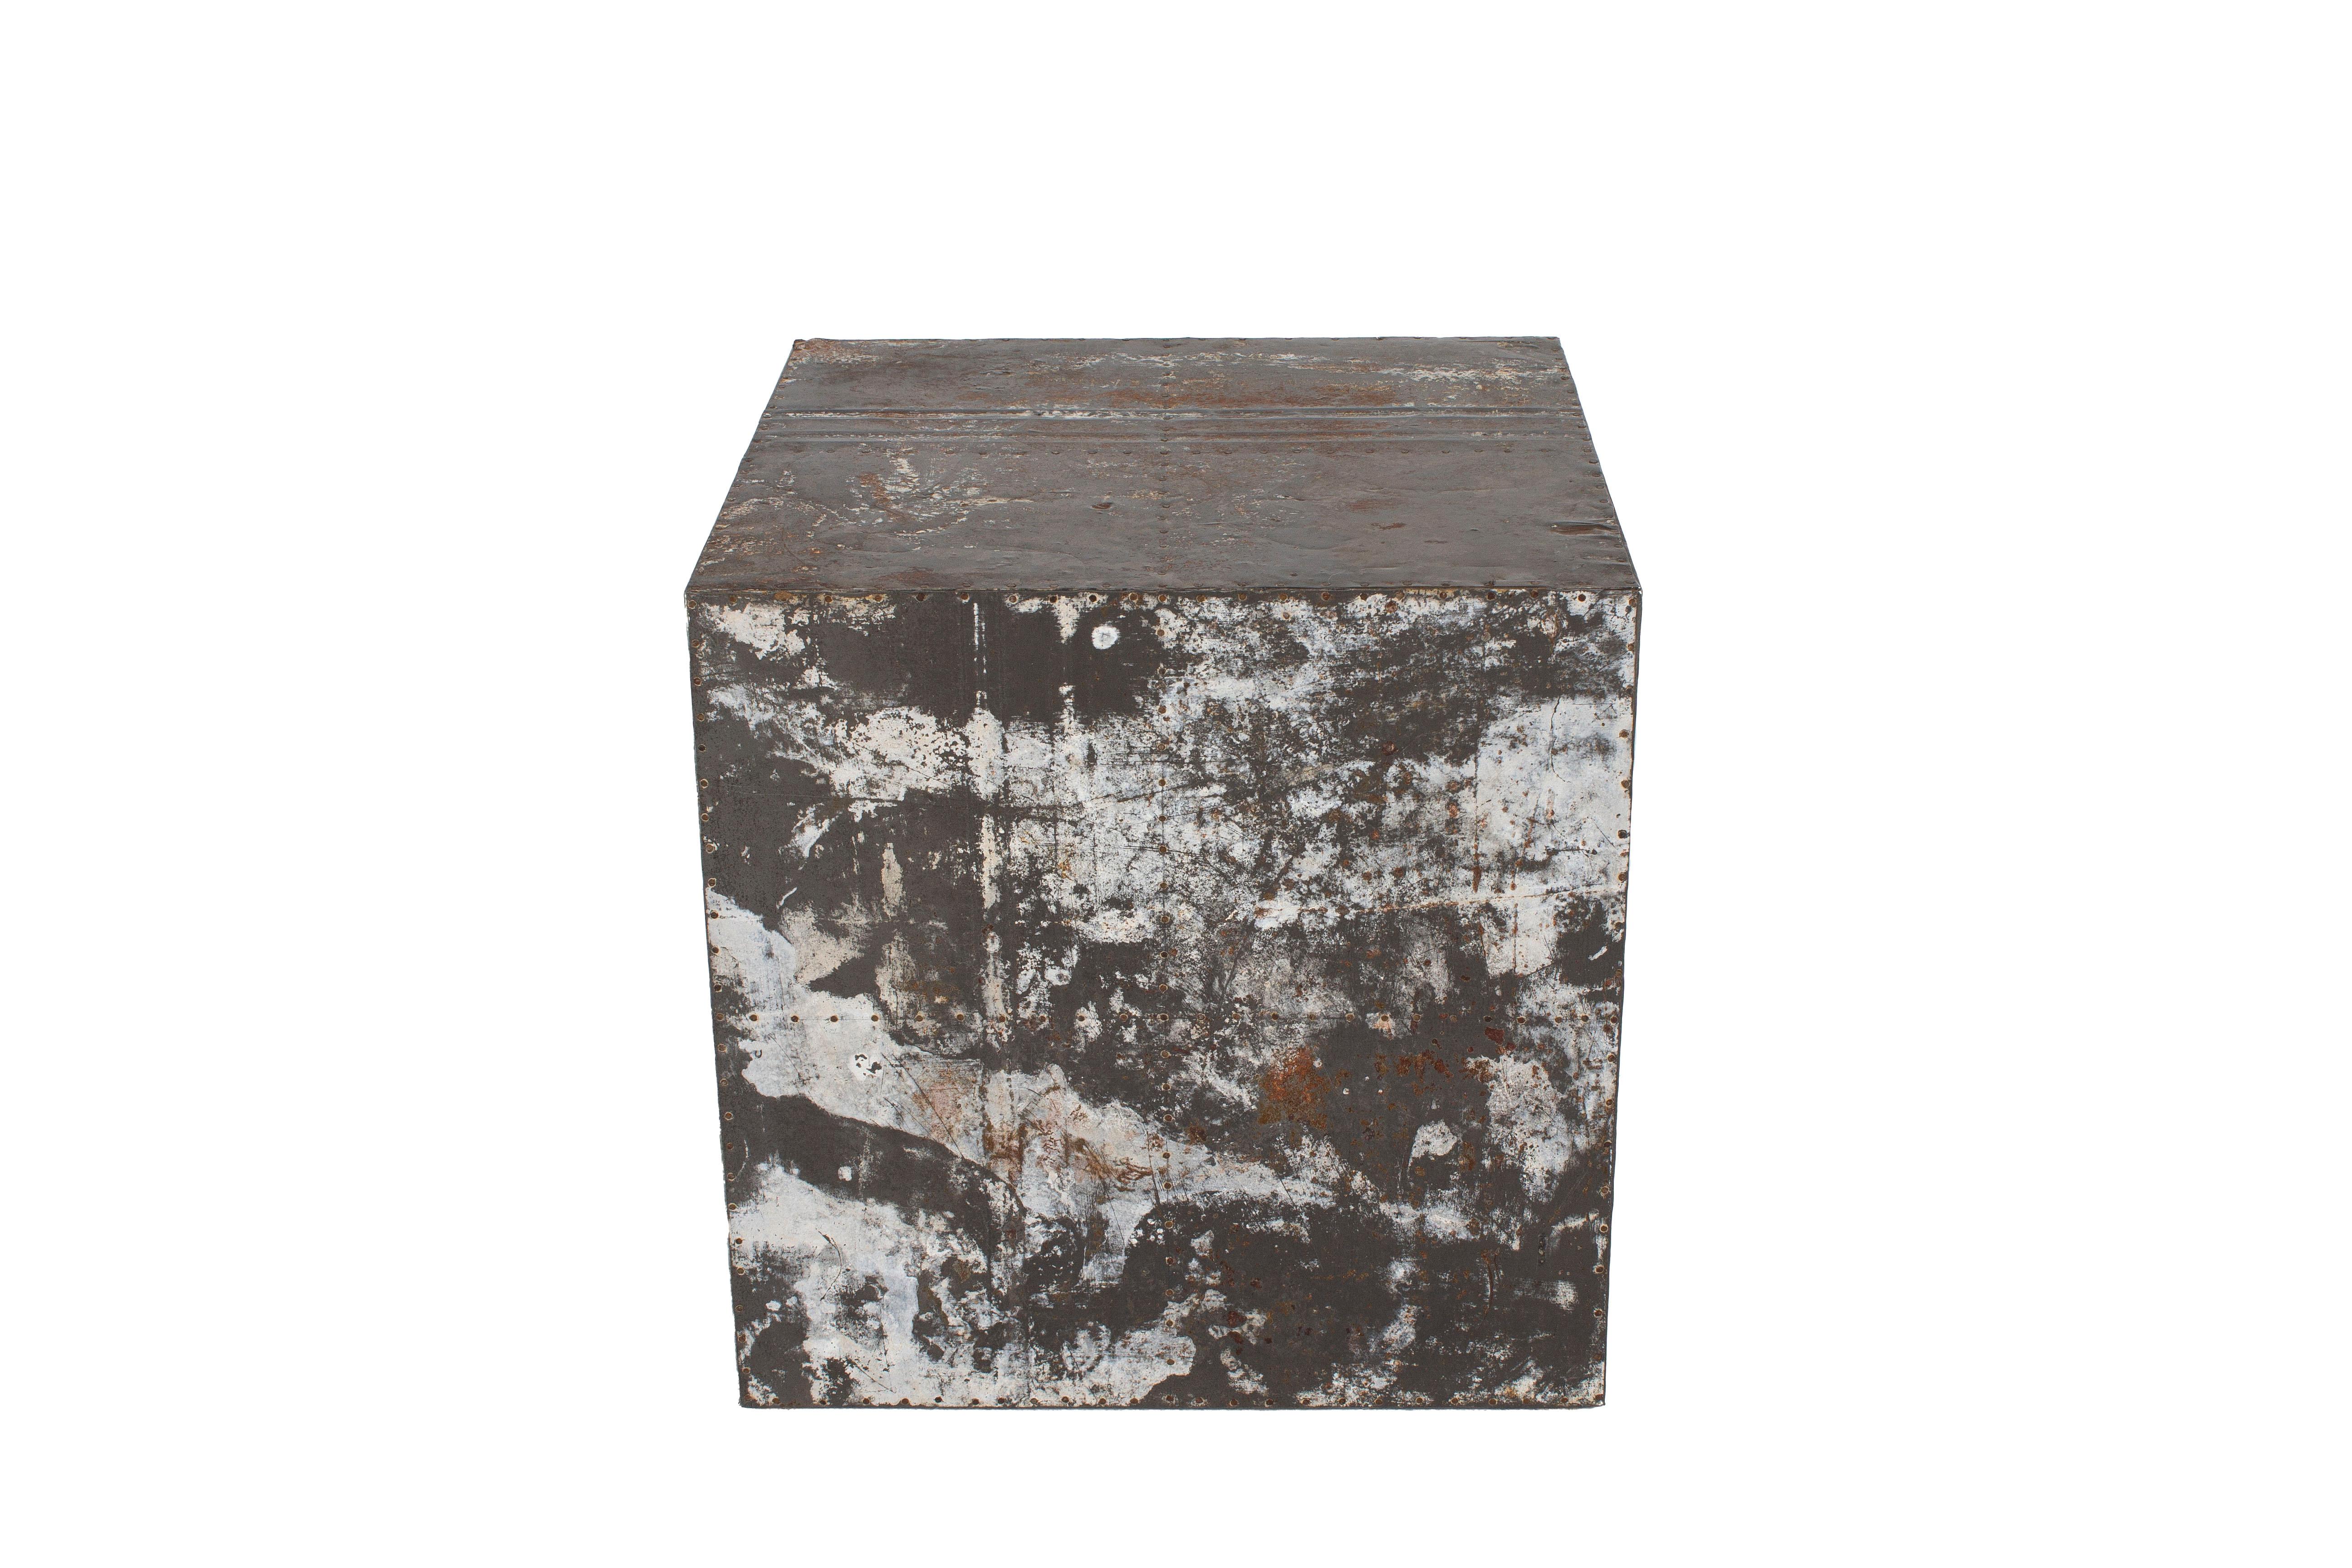 Galvanized, zinc, metal, distressed, cube

Industrial pedestal made from patinated zinc. Each pedestal will vary in patina finish. 

In my organic, contemporary, vintage and mid-century modern aesthetic.

This piece is a part of Brendan Bass’s